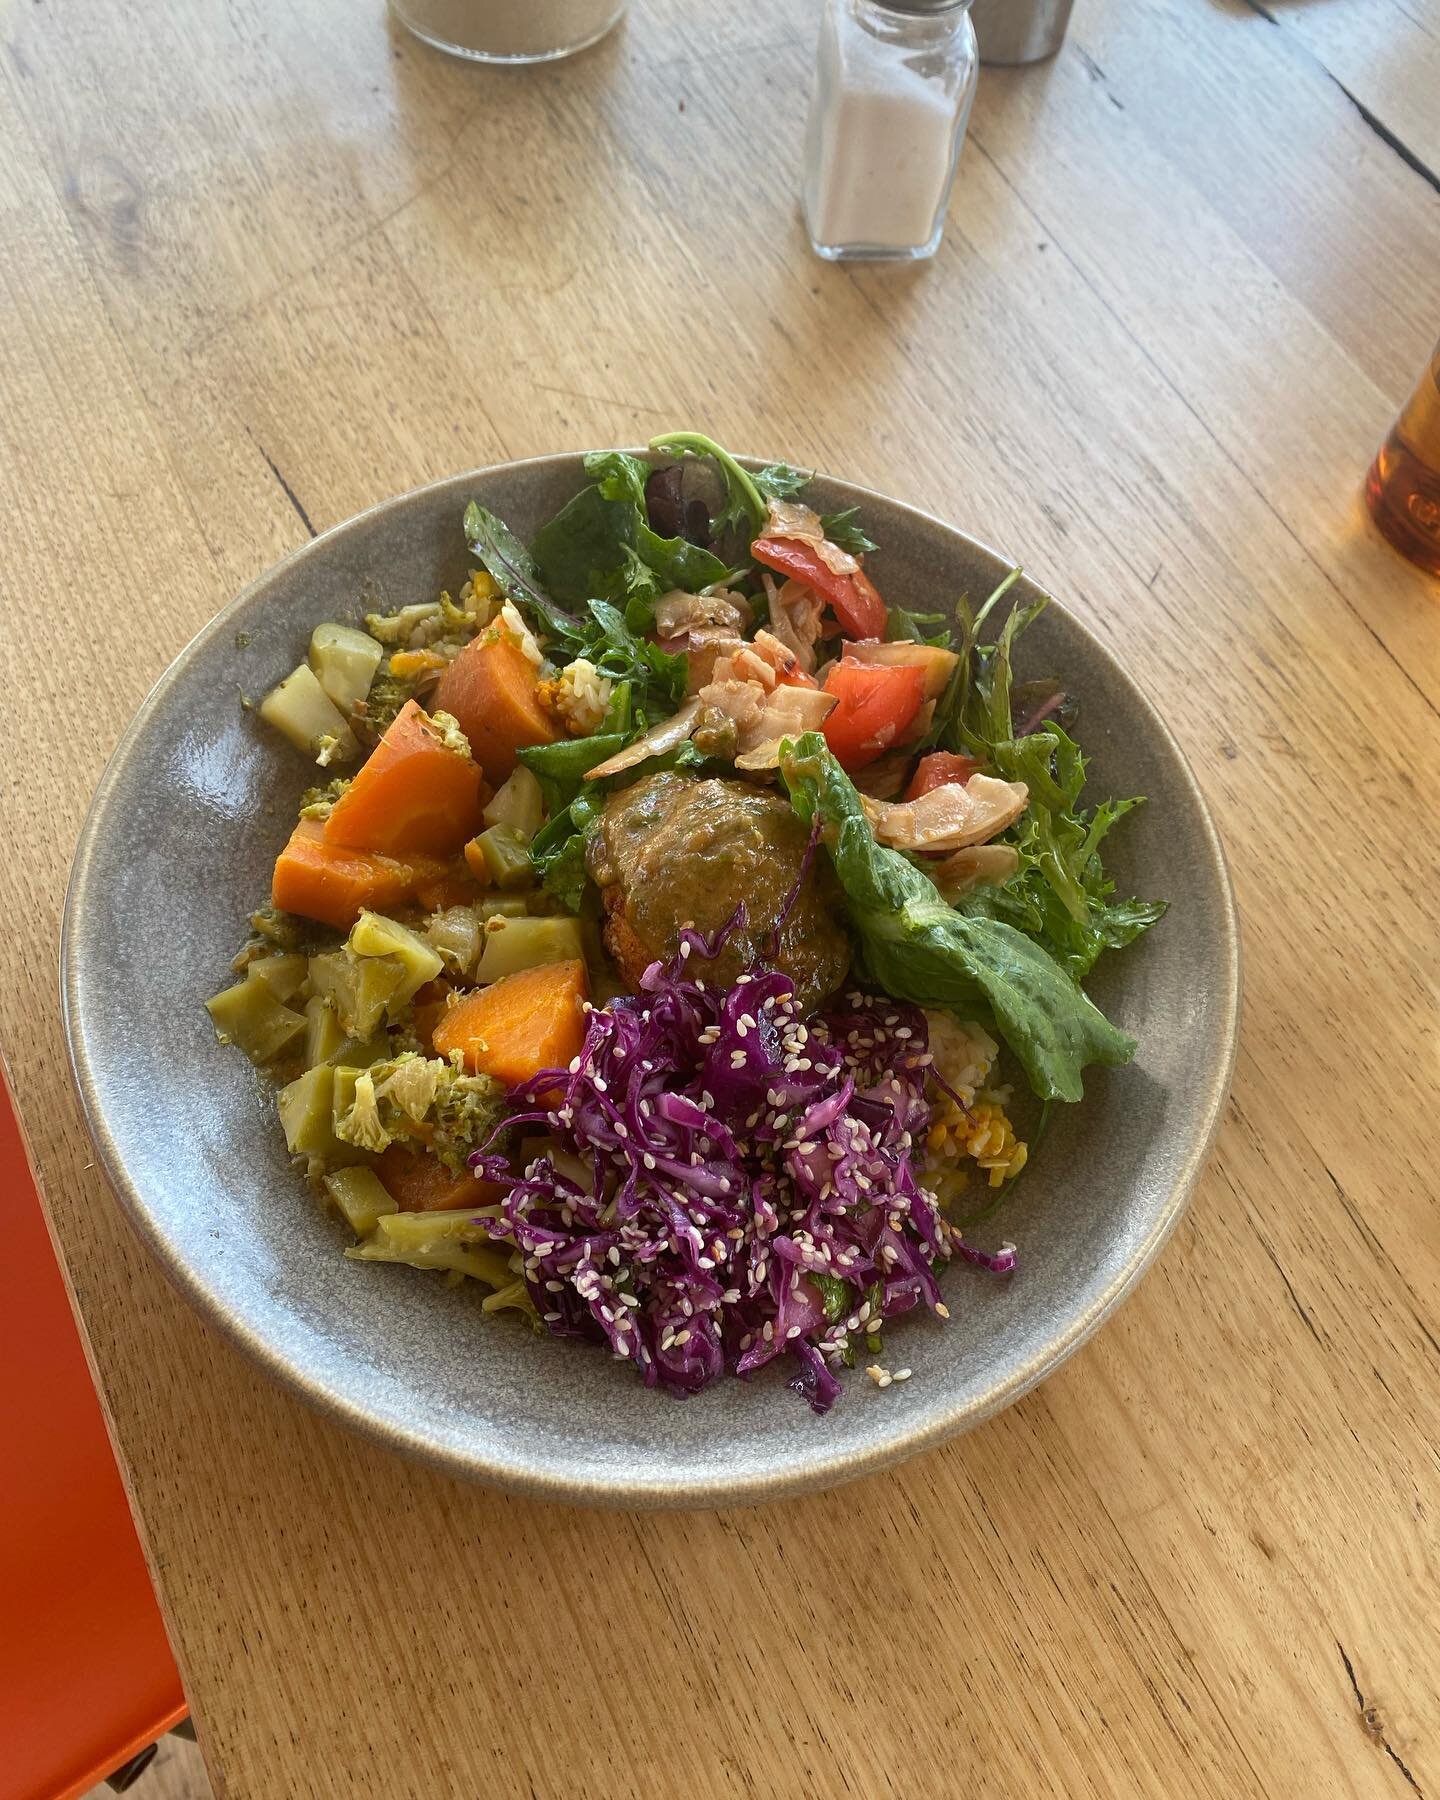 Beautiful rainbow lunch today with thai green curry with seasonal veggies, tofu pumpkin balls with kafir lime sauce, turmeric and ginger brown and white rice, toasted coconut tomato salad and cabbage pickle! 
Organic, vegan and gluten free.
Yum ❤️🧡?